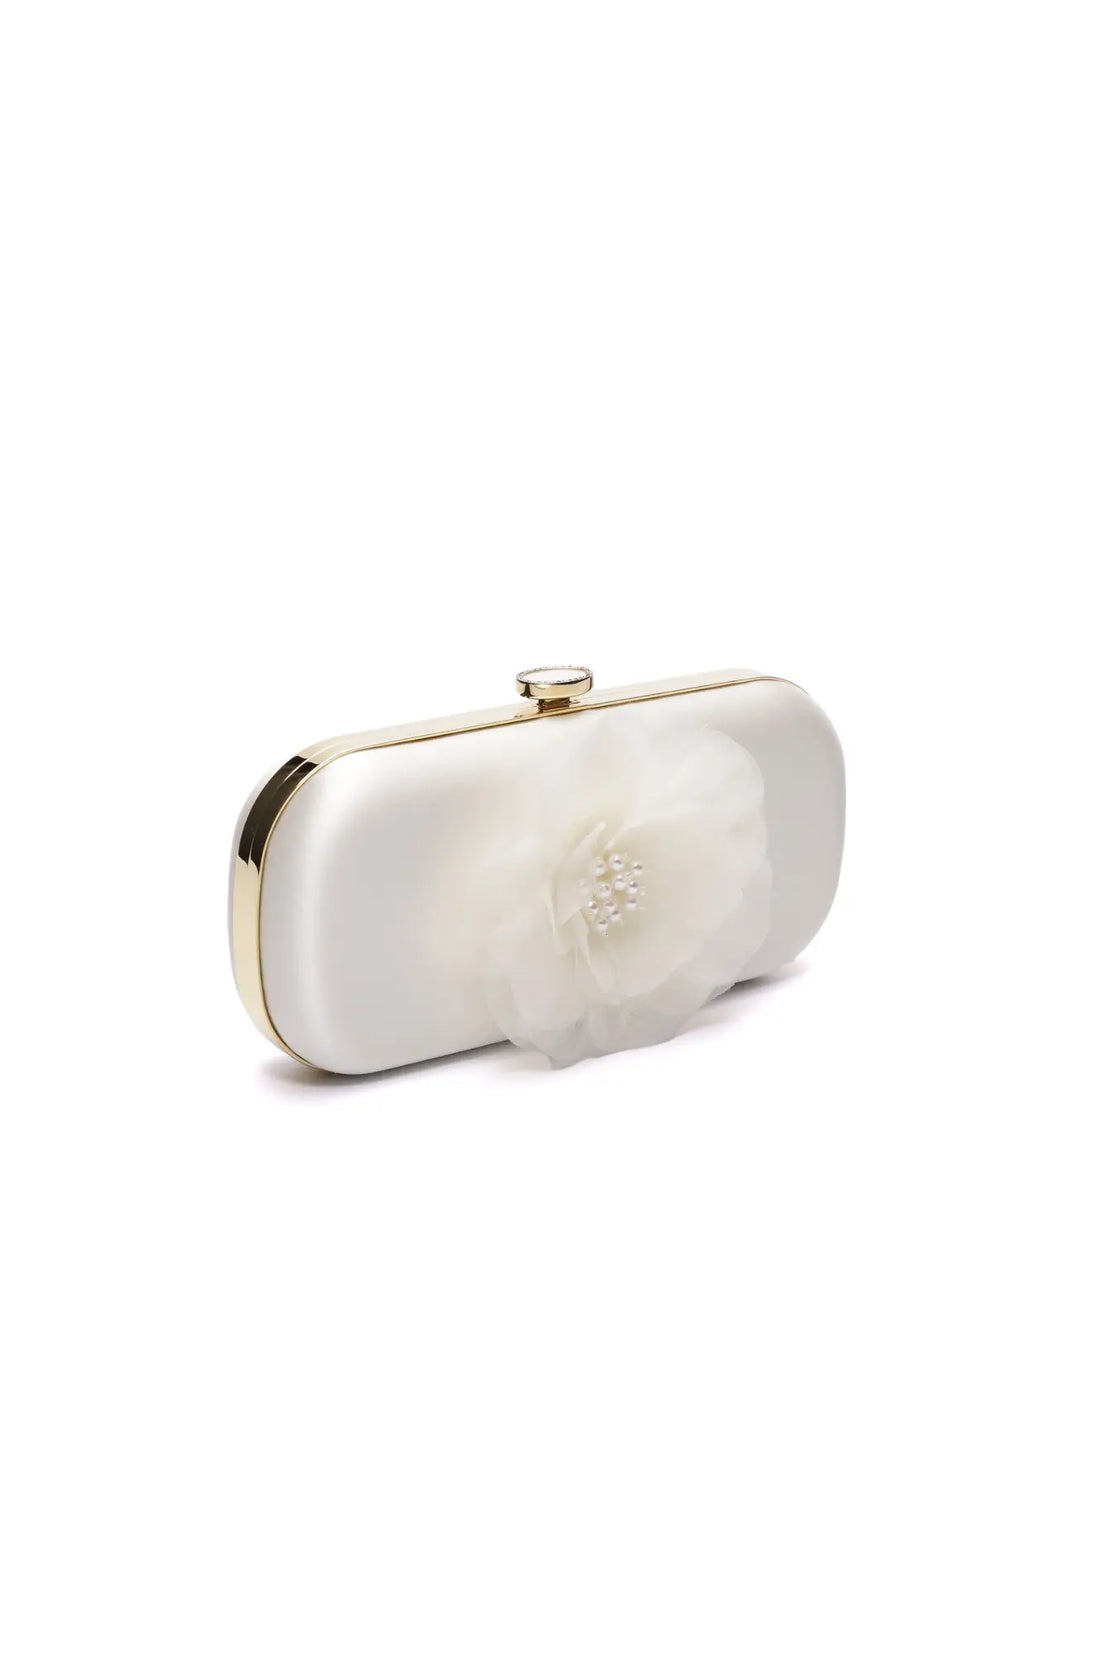 Elegant Ivory Satin Bella Fiori Clutch with floral embellishment and gold accents from The Bella Rosa Collection.